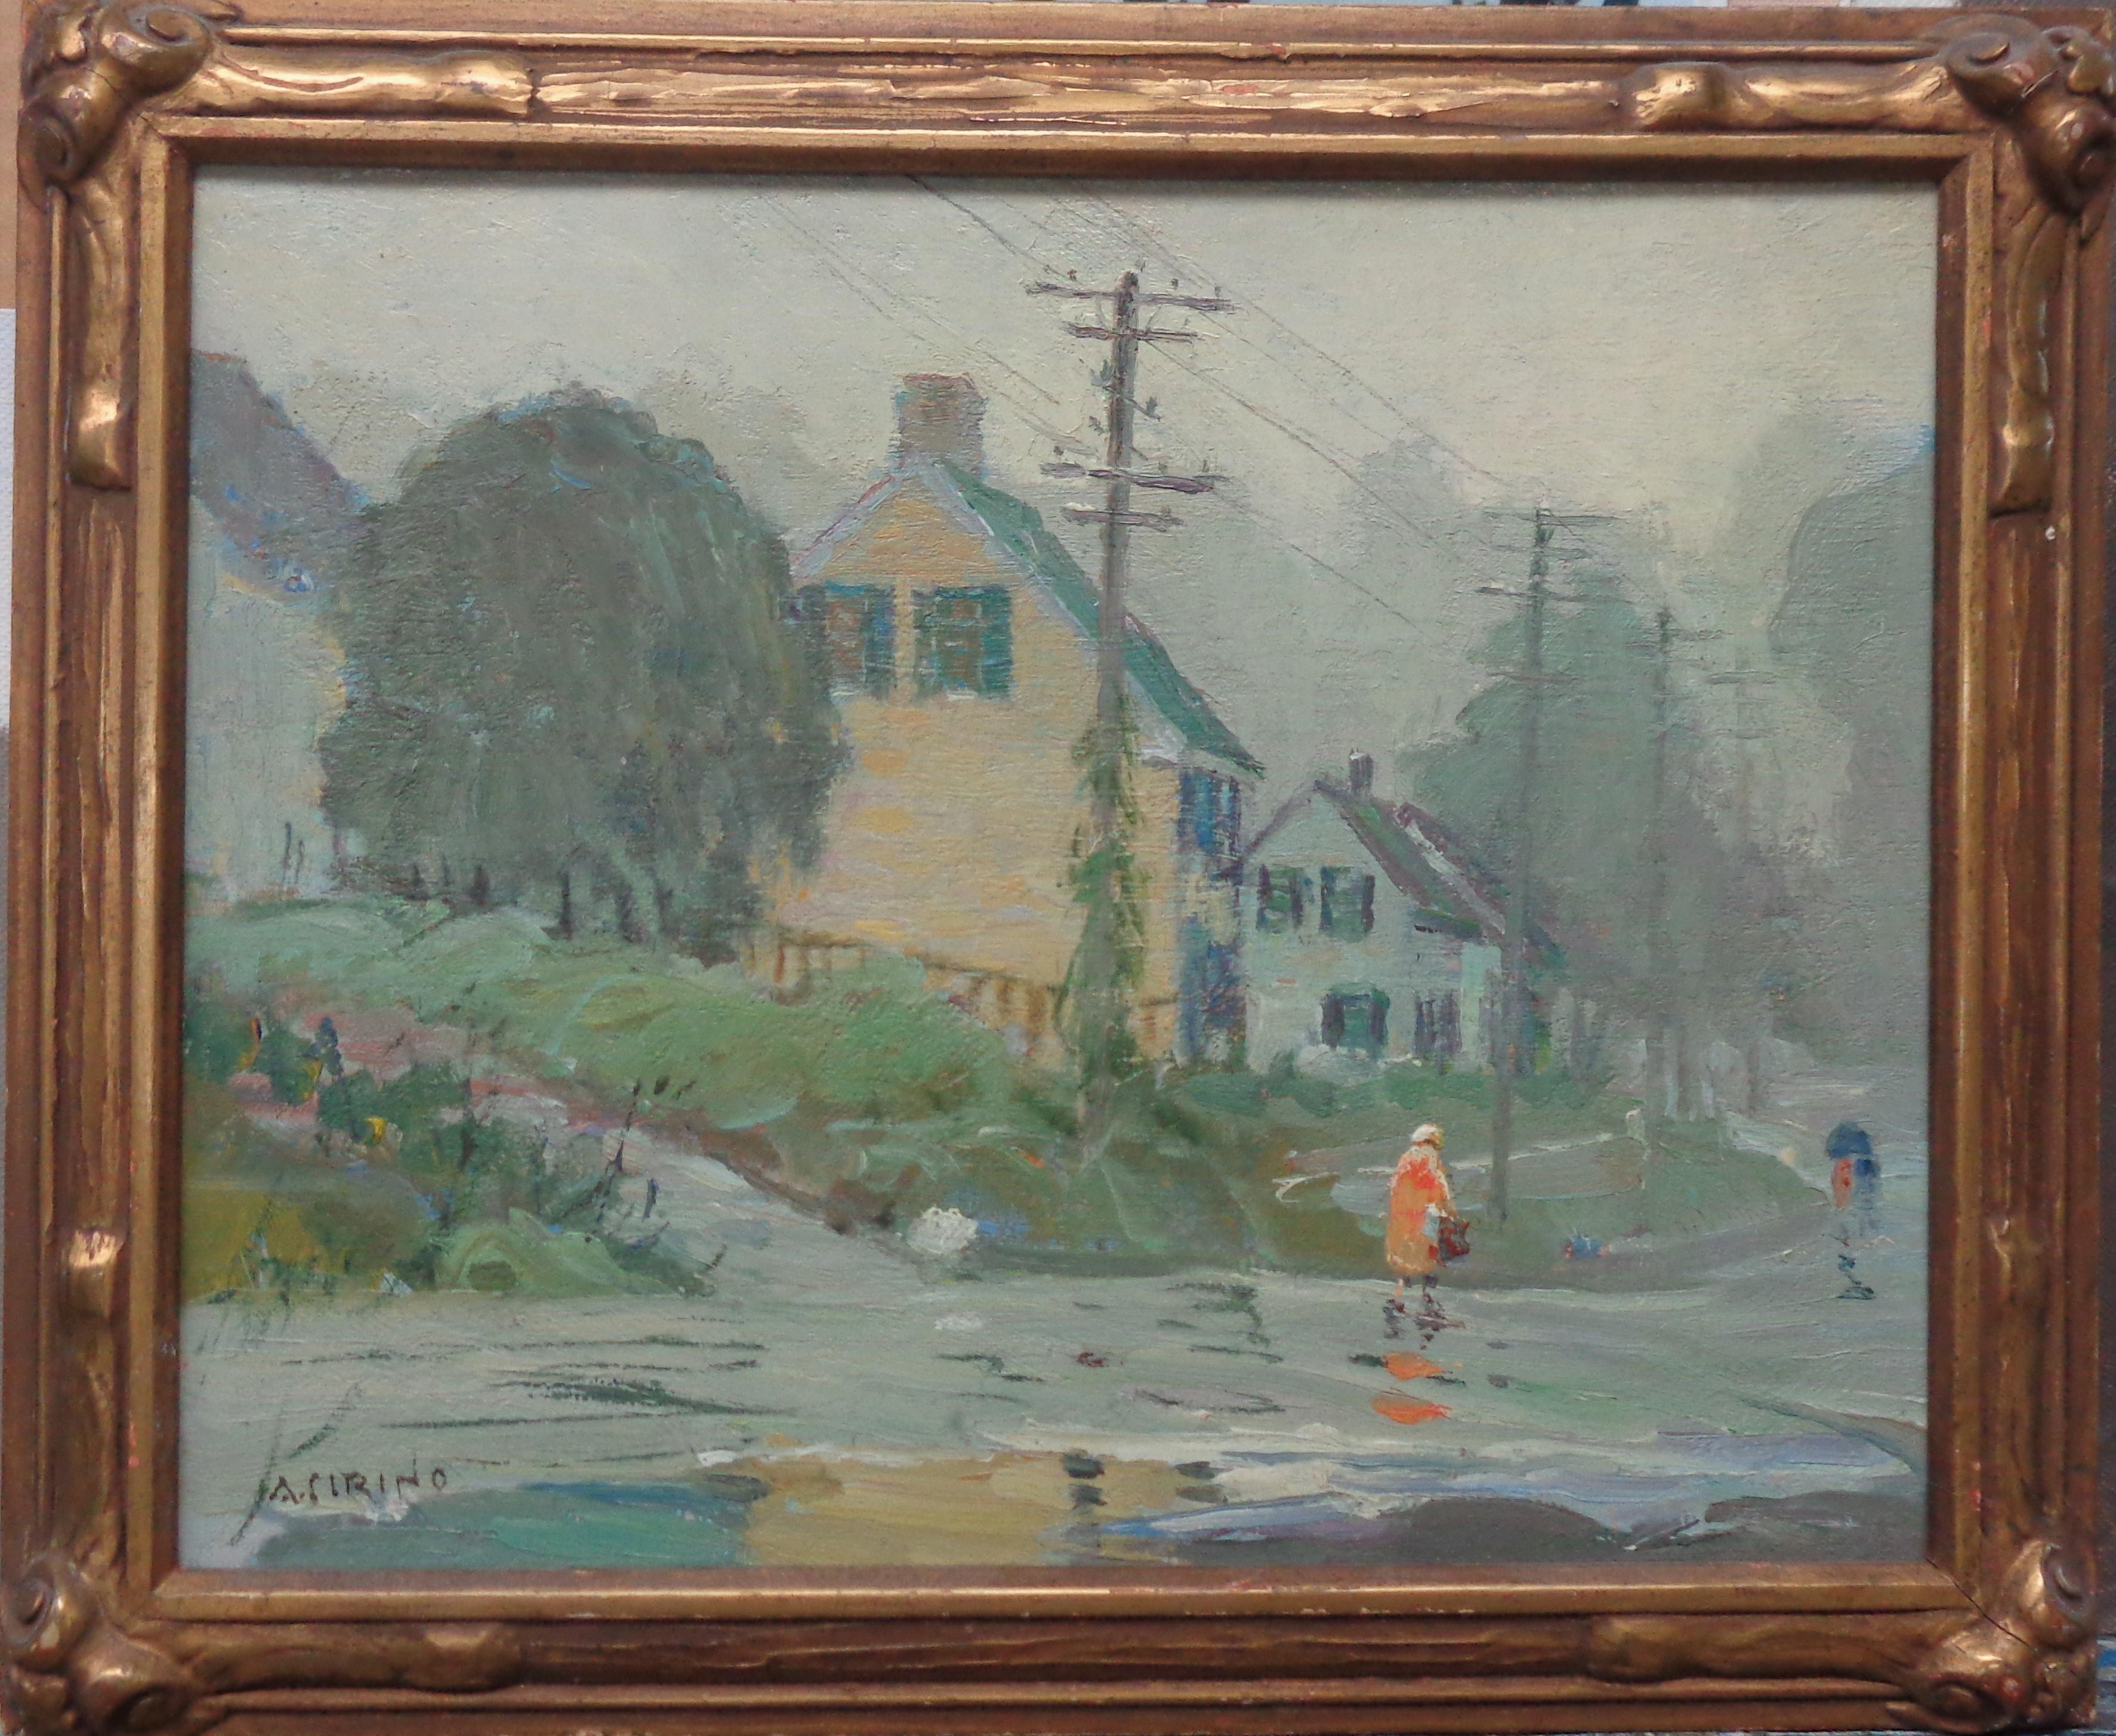 Here is a very beautiful and unique painting on paper panel by Antonio Cirino . The painting is is good shape ready to hang and the original frame shows some age. Image measures 8 x 10. Cirino was a member of both the Salmagundi Club and Rockport